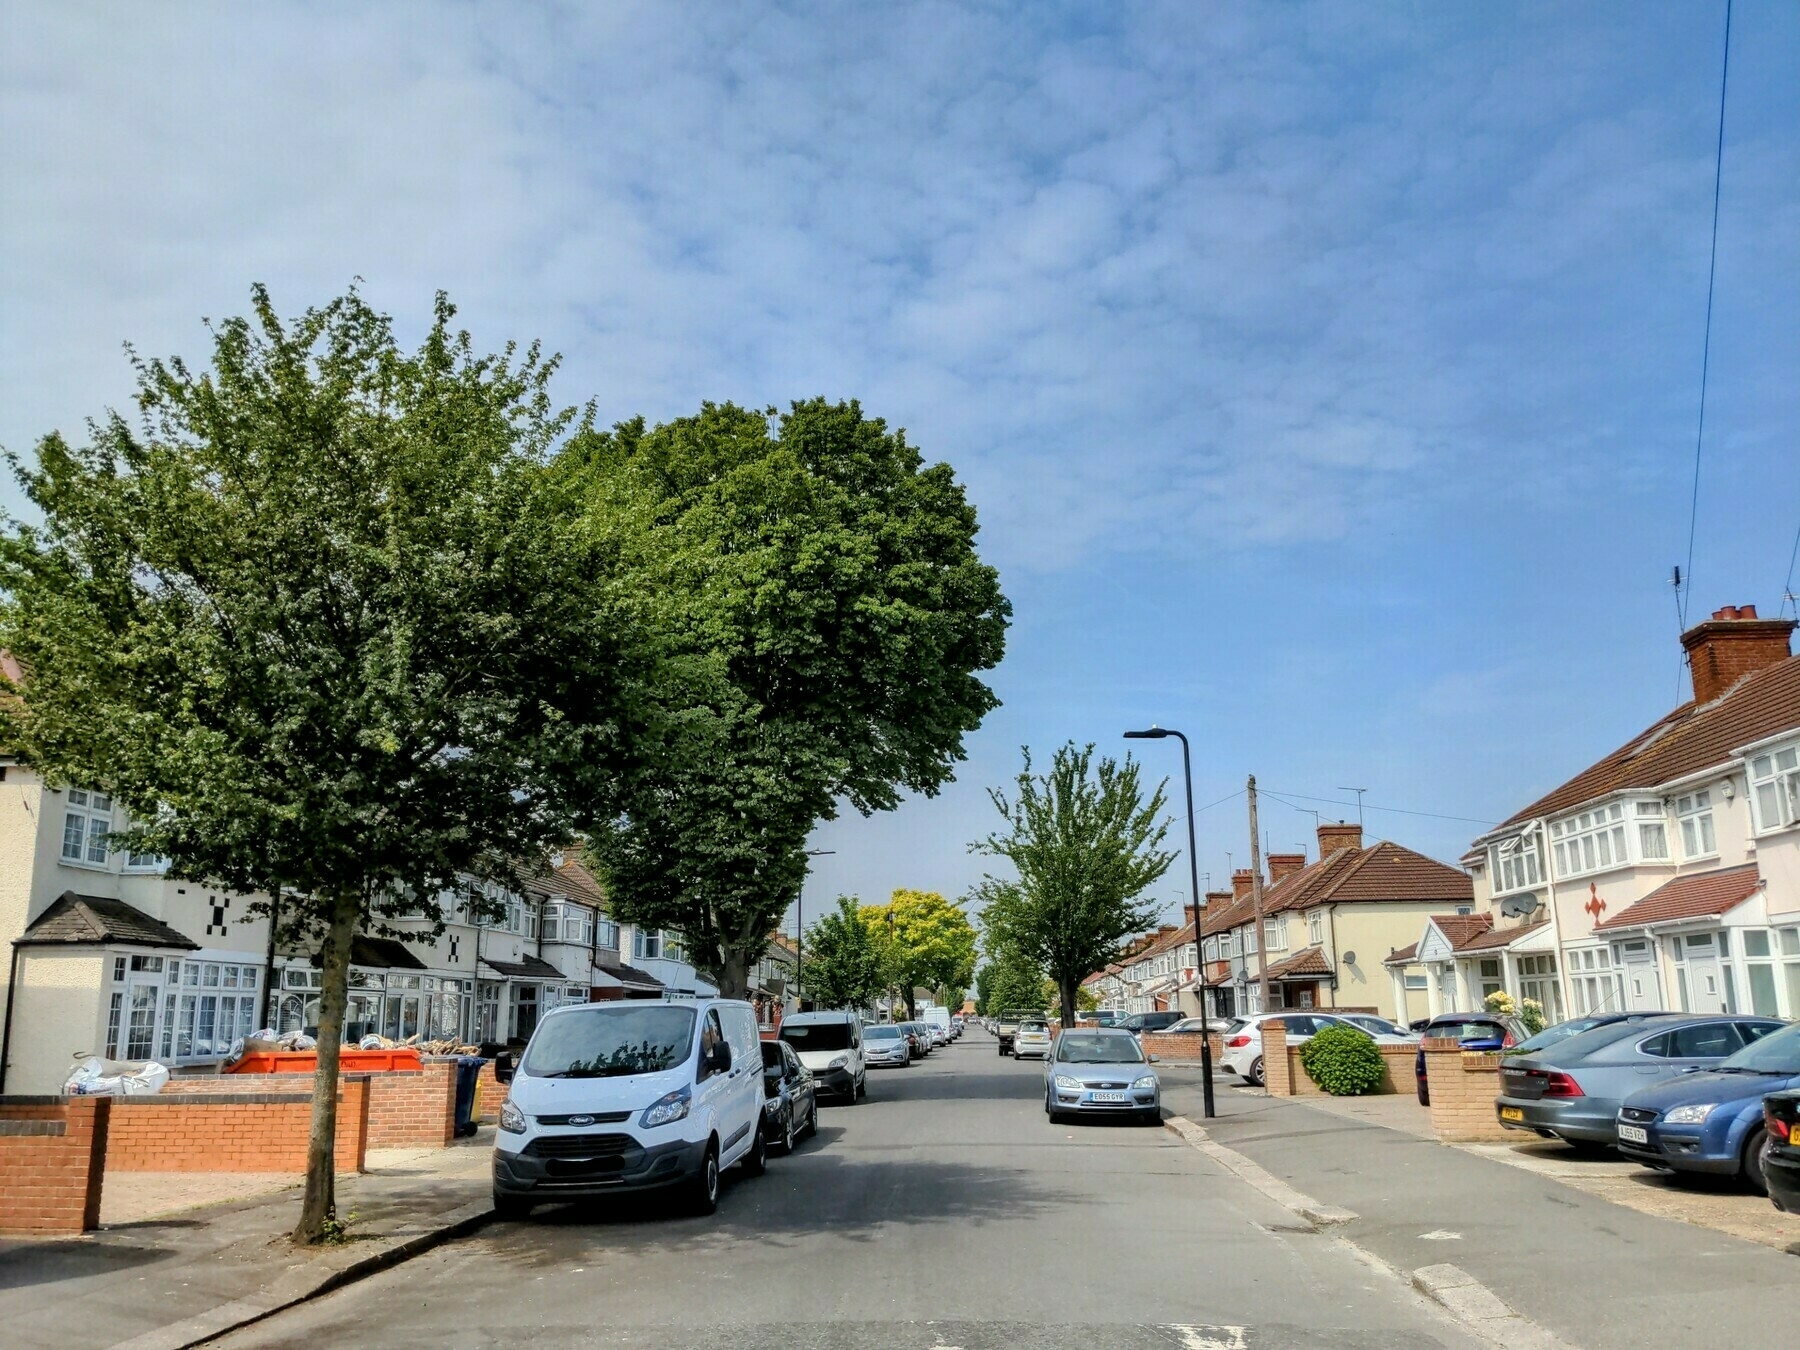 Photo of trees lining a local street in Southall Green, on a very warm Sunday morning 